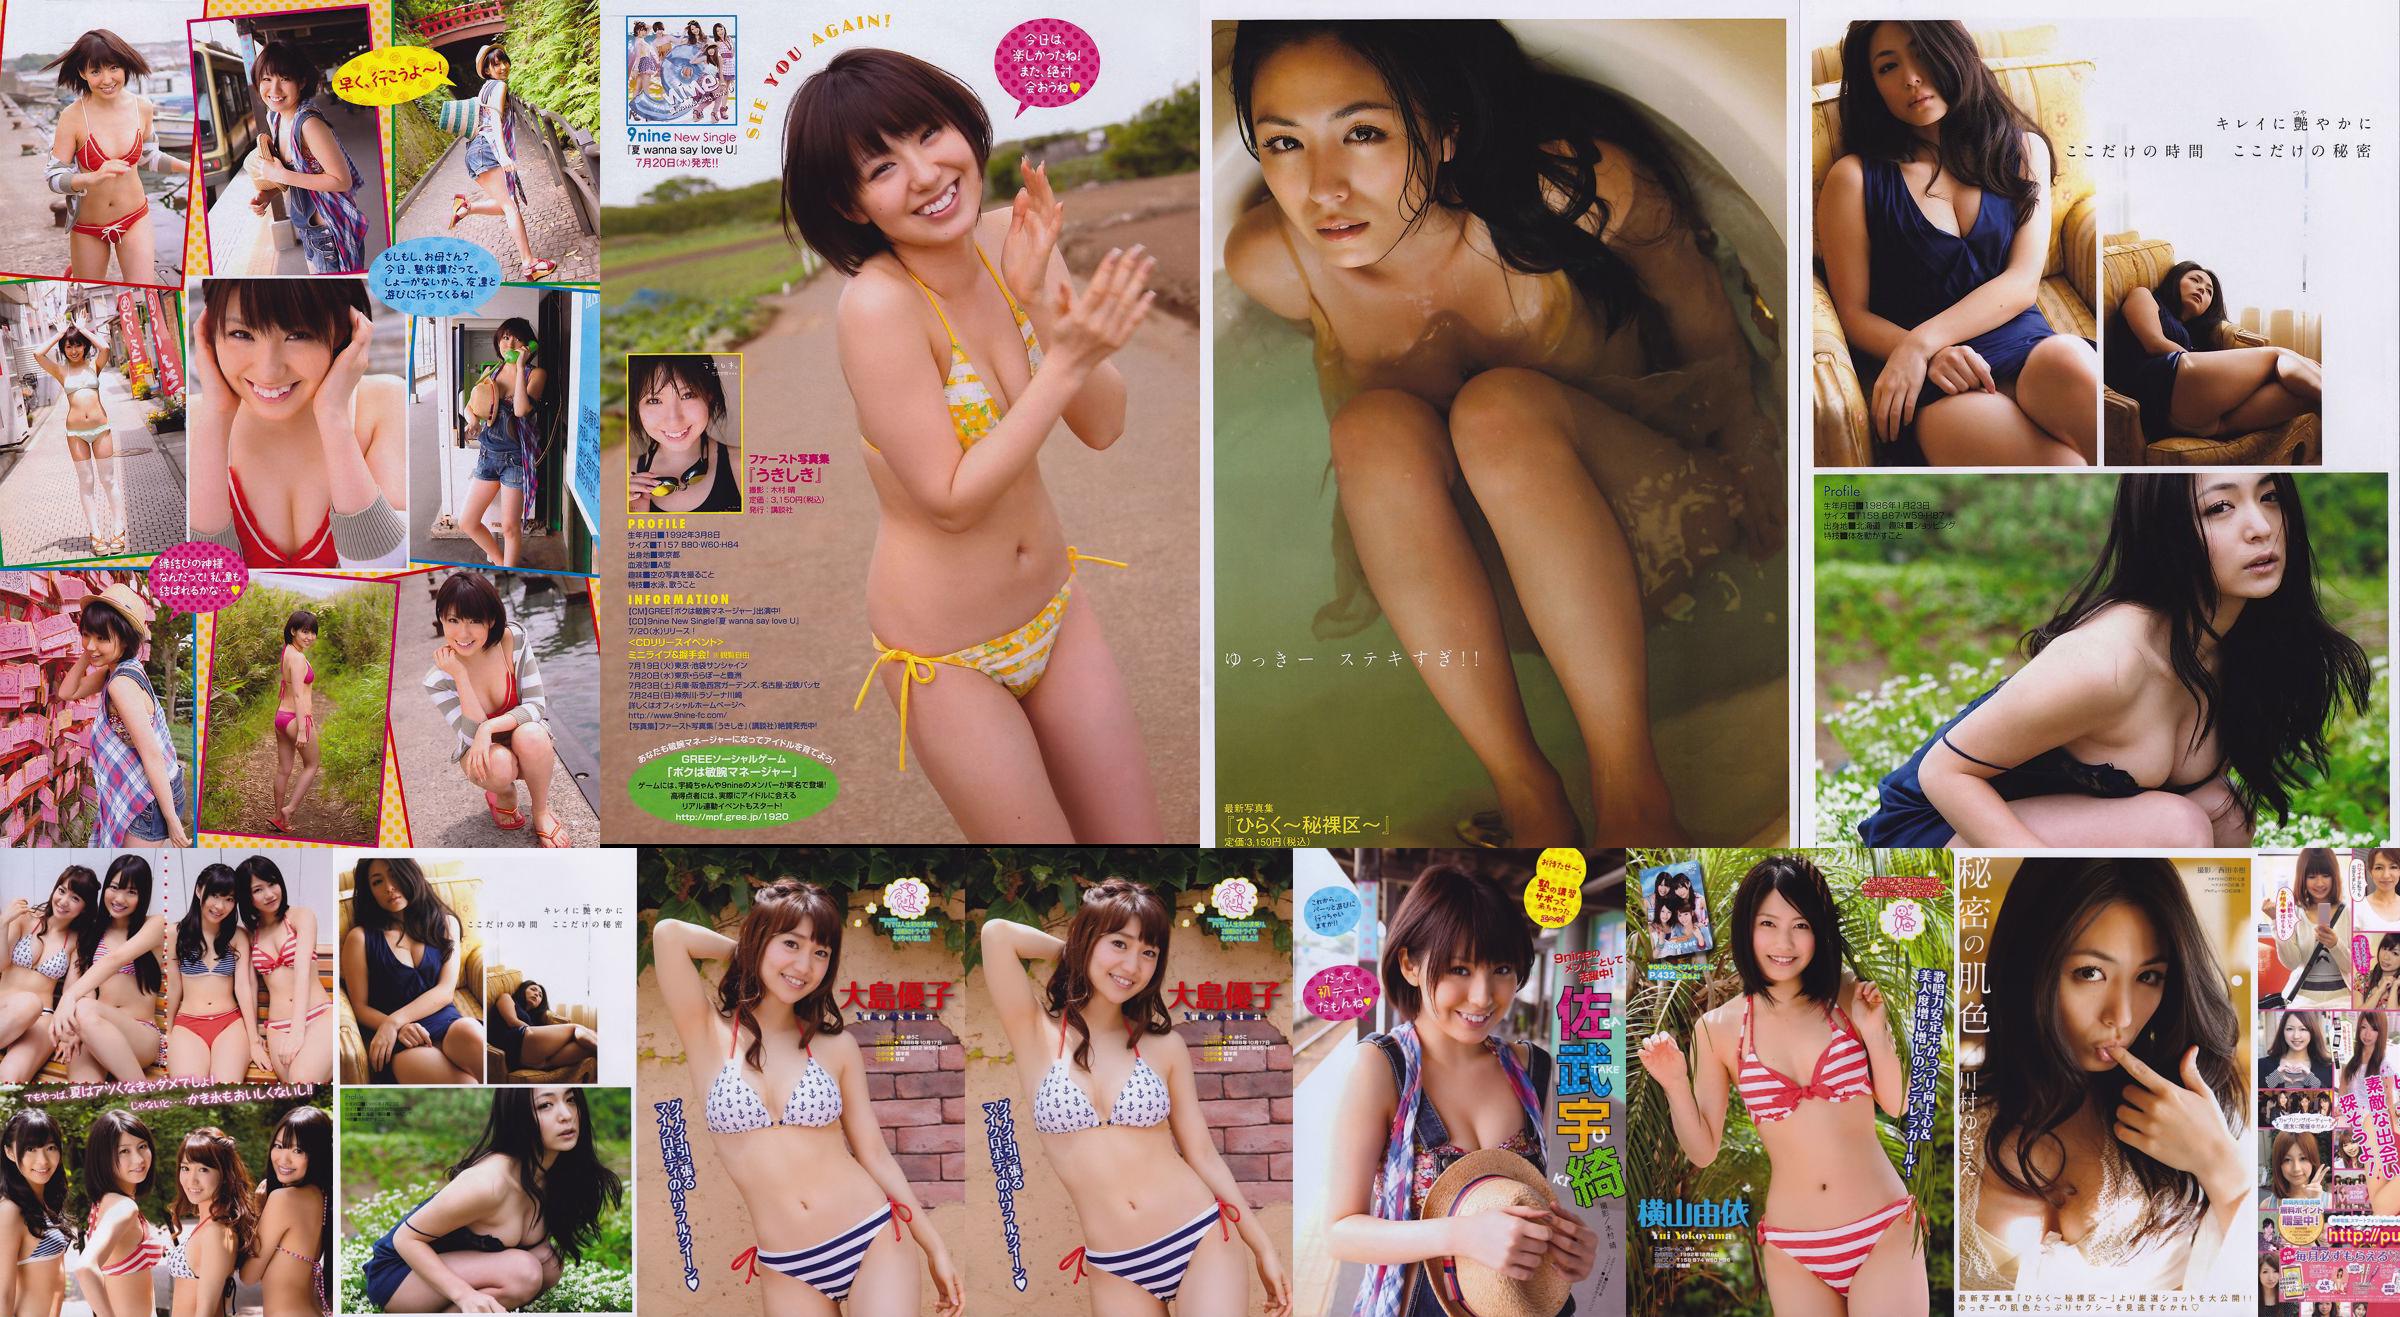 [Young Magazine] Not yet 川村ゆきえ 佐武宇綺 2011年No.32 写真杂志 No.1cee9d 第3页